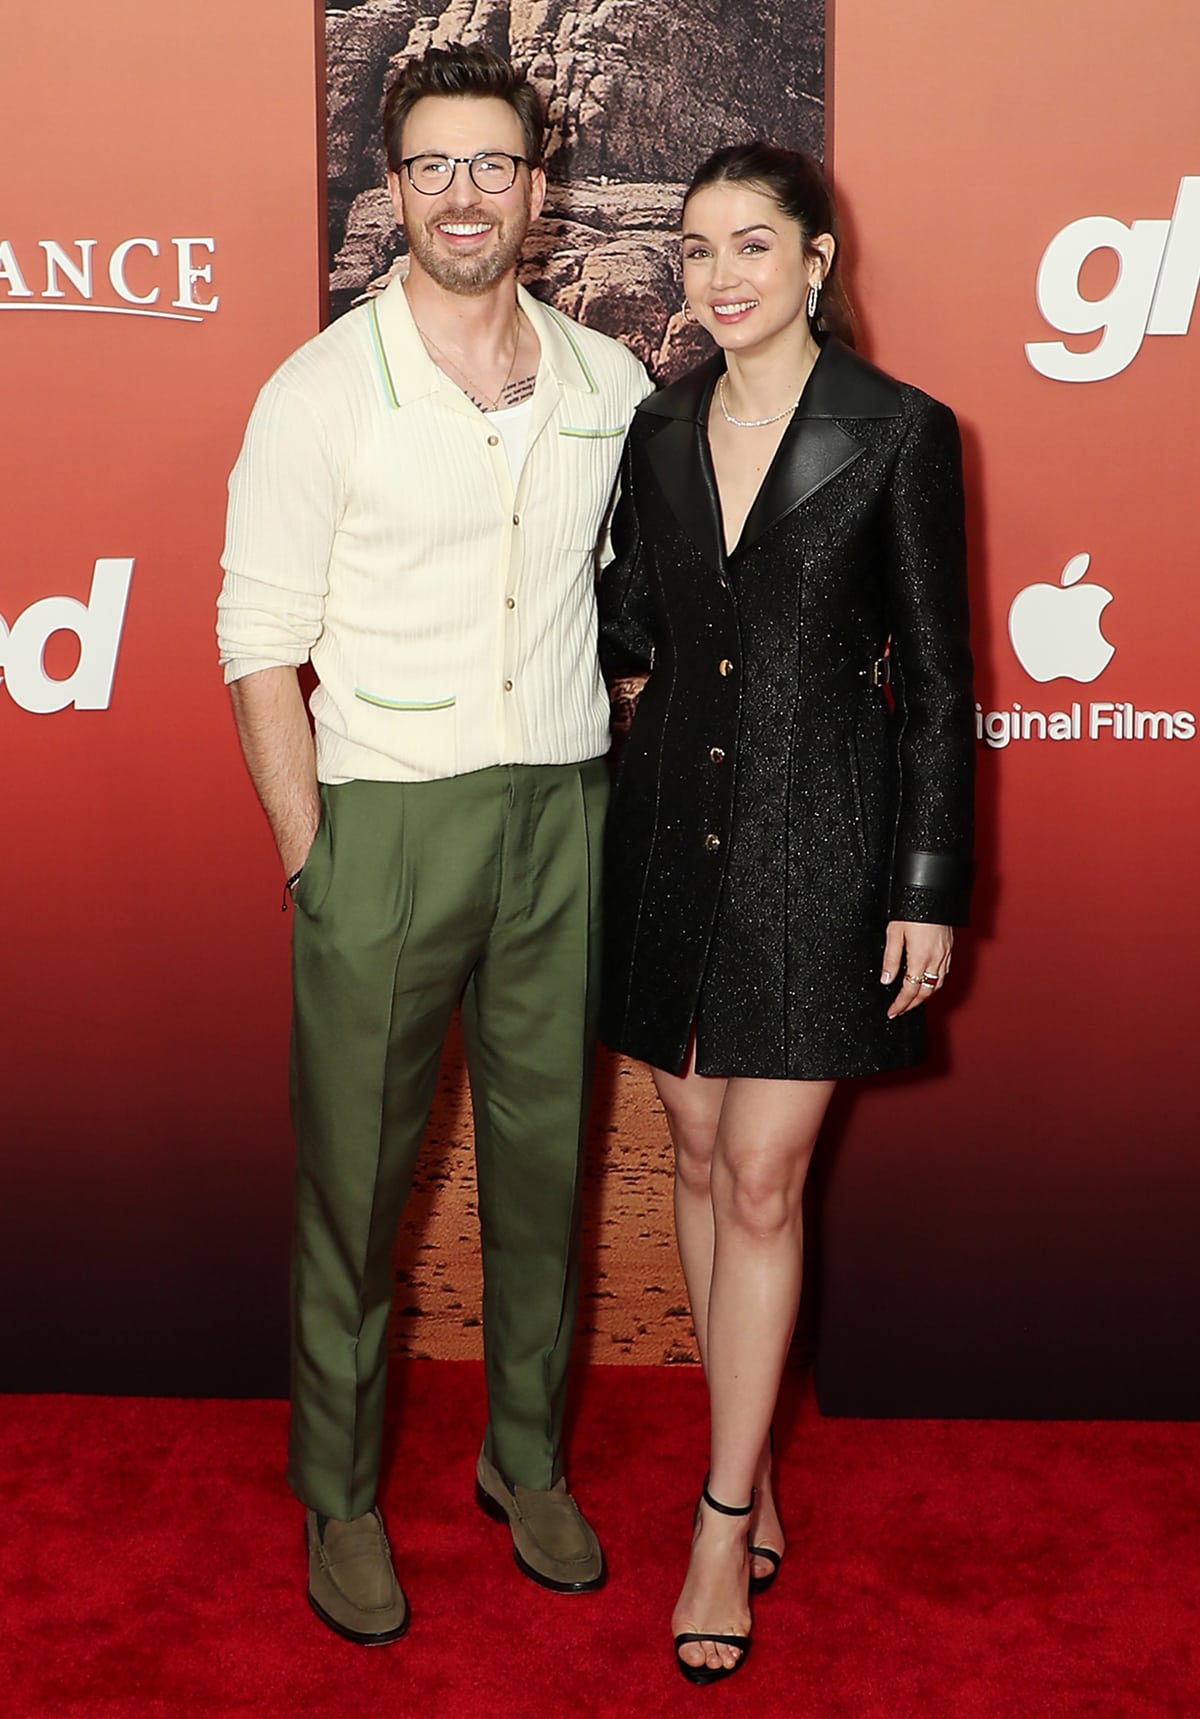 Chris Evans, standing at 6ft 0 (182.9 cm), appeared notably taller than Ana de Armas, who is 5ft 6 (167.6 cm), as they attended the premiere of "Ghosted" at AMC Lincoln Square Theater on April 18, 2023, in New York City